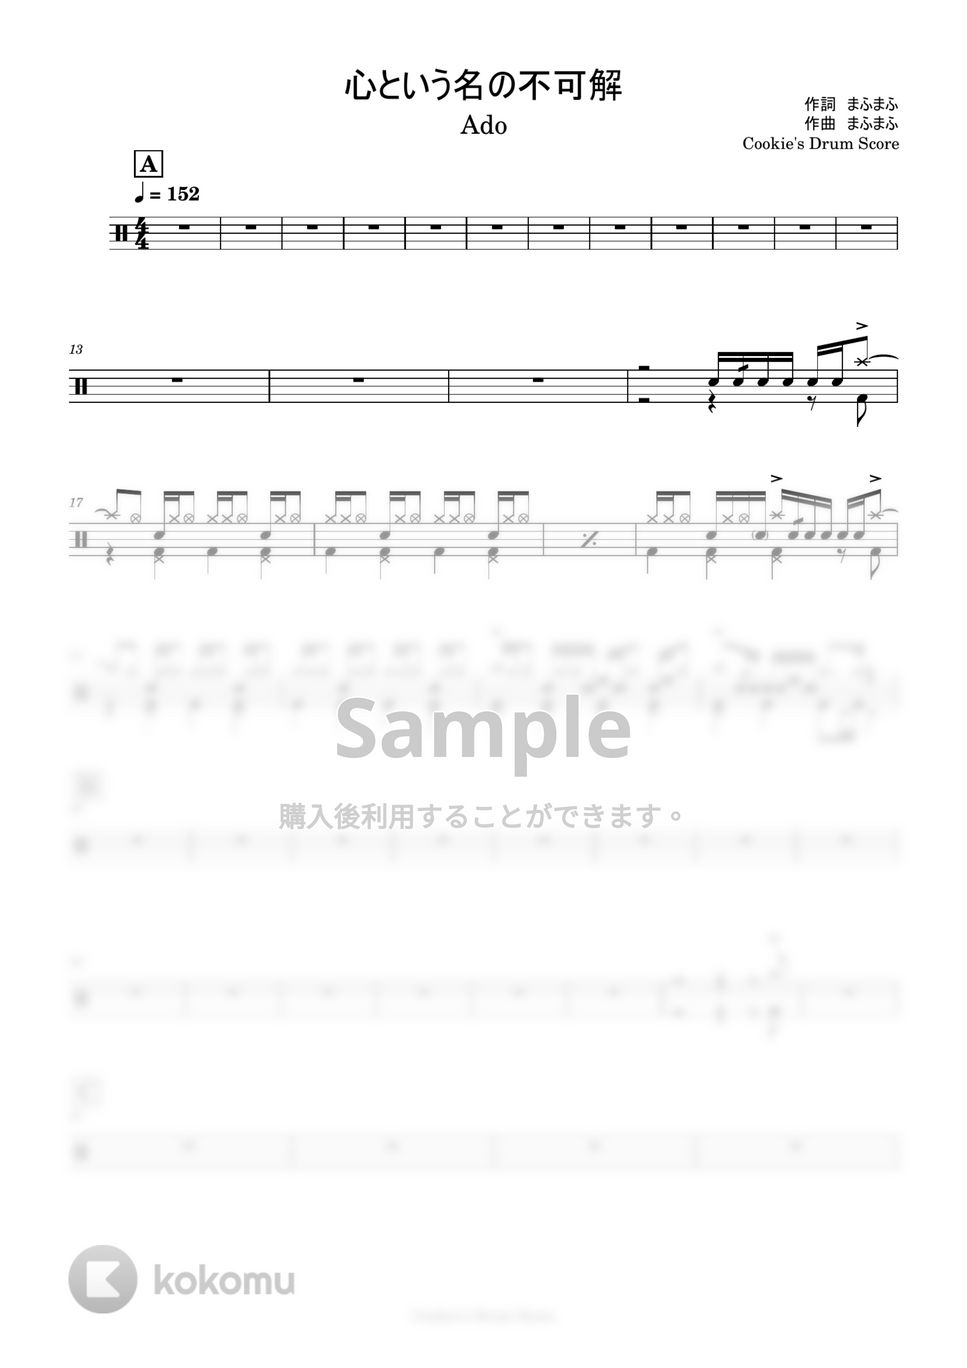 Ado - 心という名の不可解 by Cookie's Drum Score